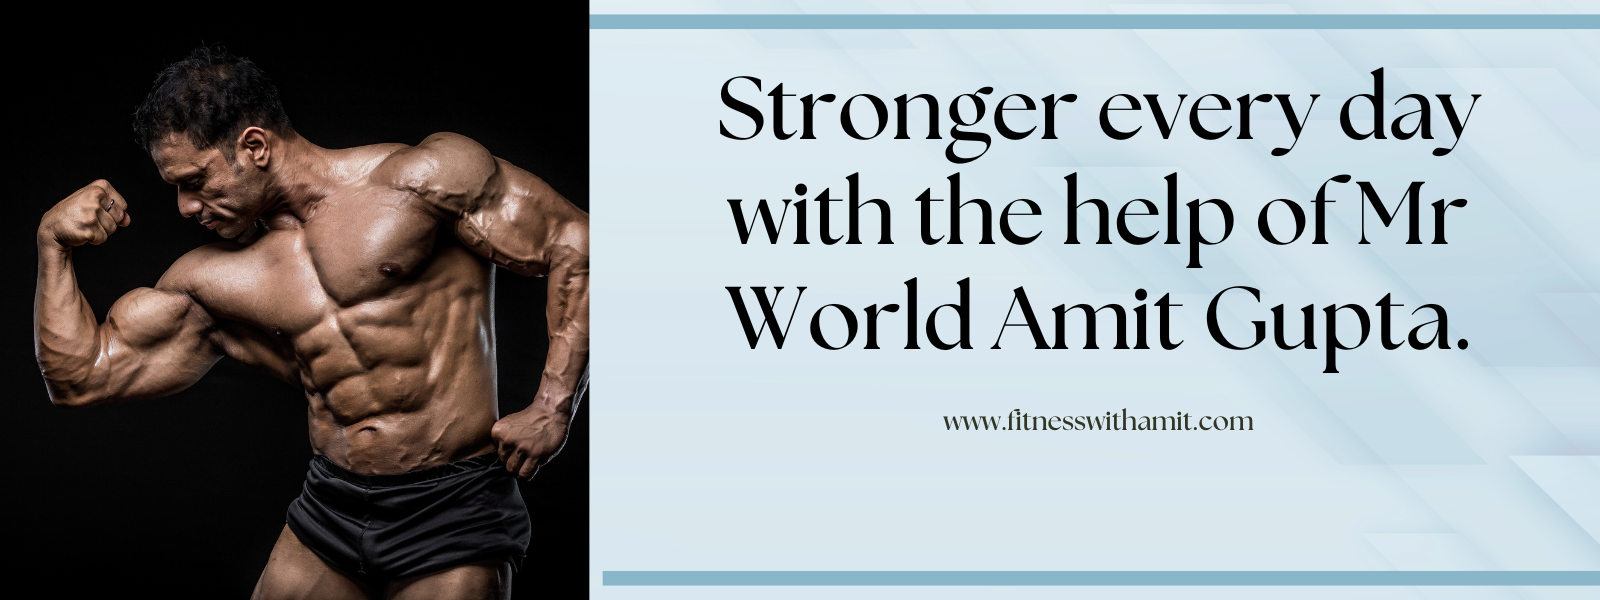 Stronger every day with the help of Mr World Amit Gupta.